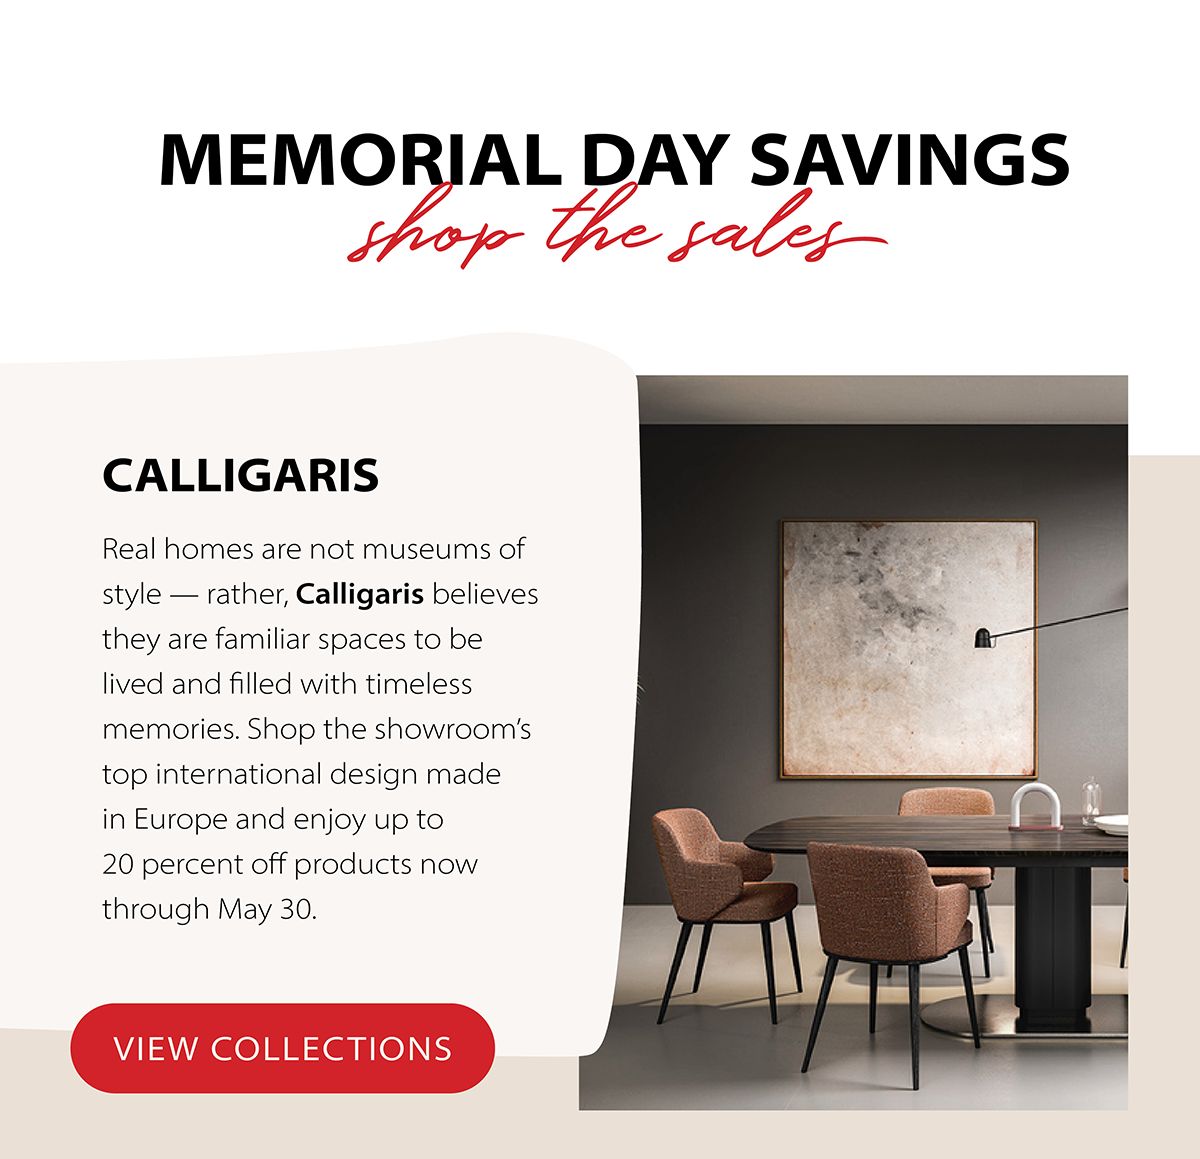 Get ready for summer with Memorial Day sales and outdoor collections